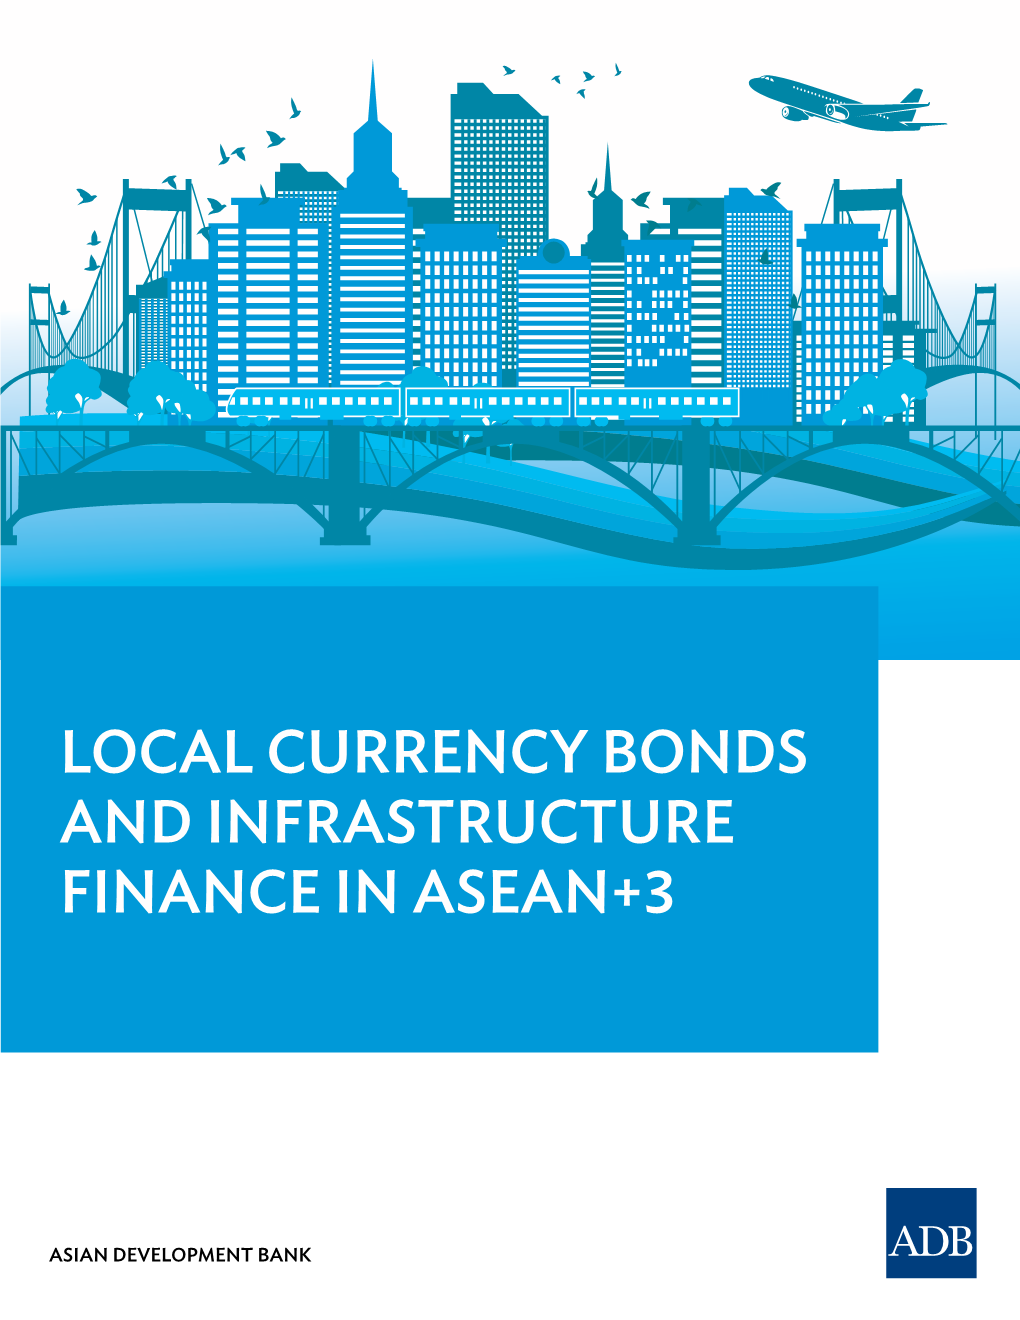 Local Currency Bonds and Infrastructure Finance in ASEAN+3